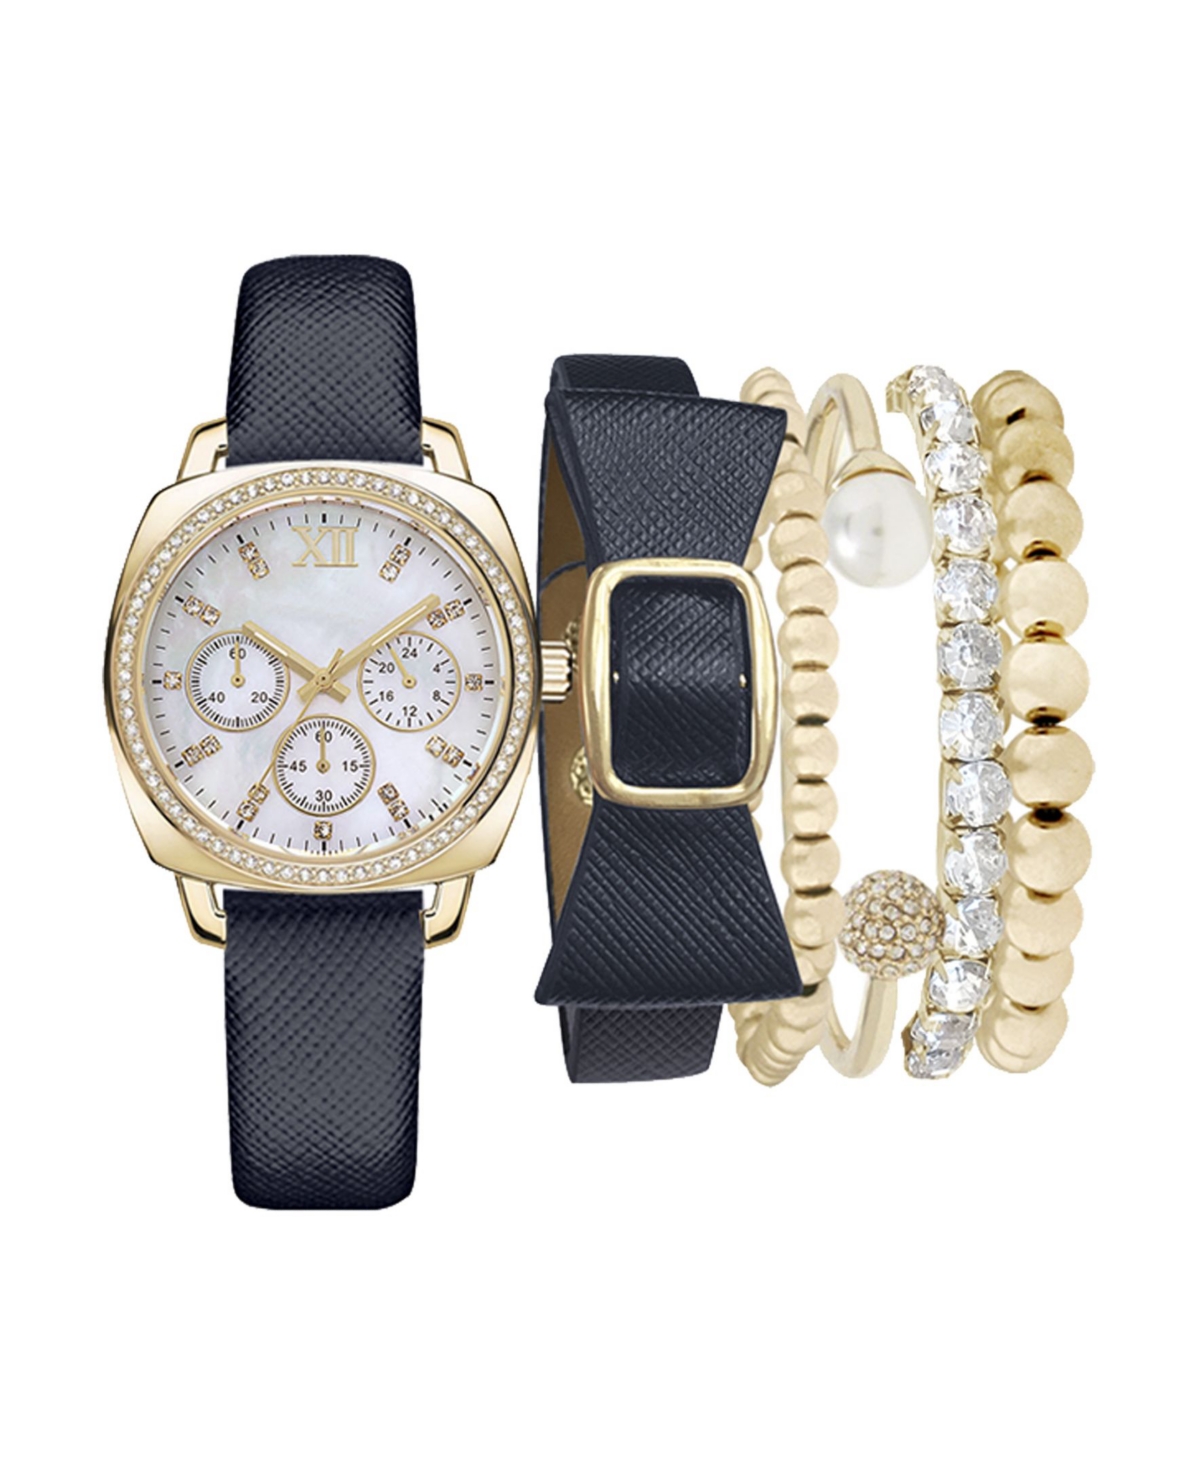 Jessica Carlyle Women's Analog Navy Strap Watch 34mm with Navy and Gold-Tone Bracelets Set